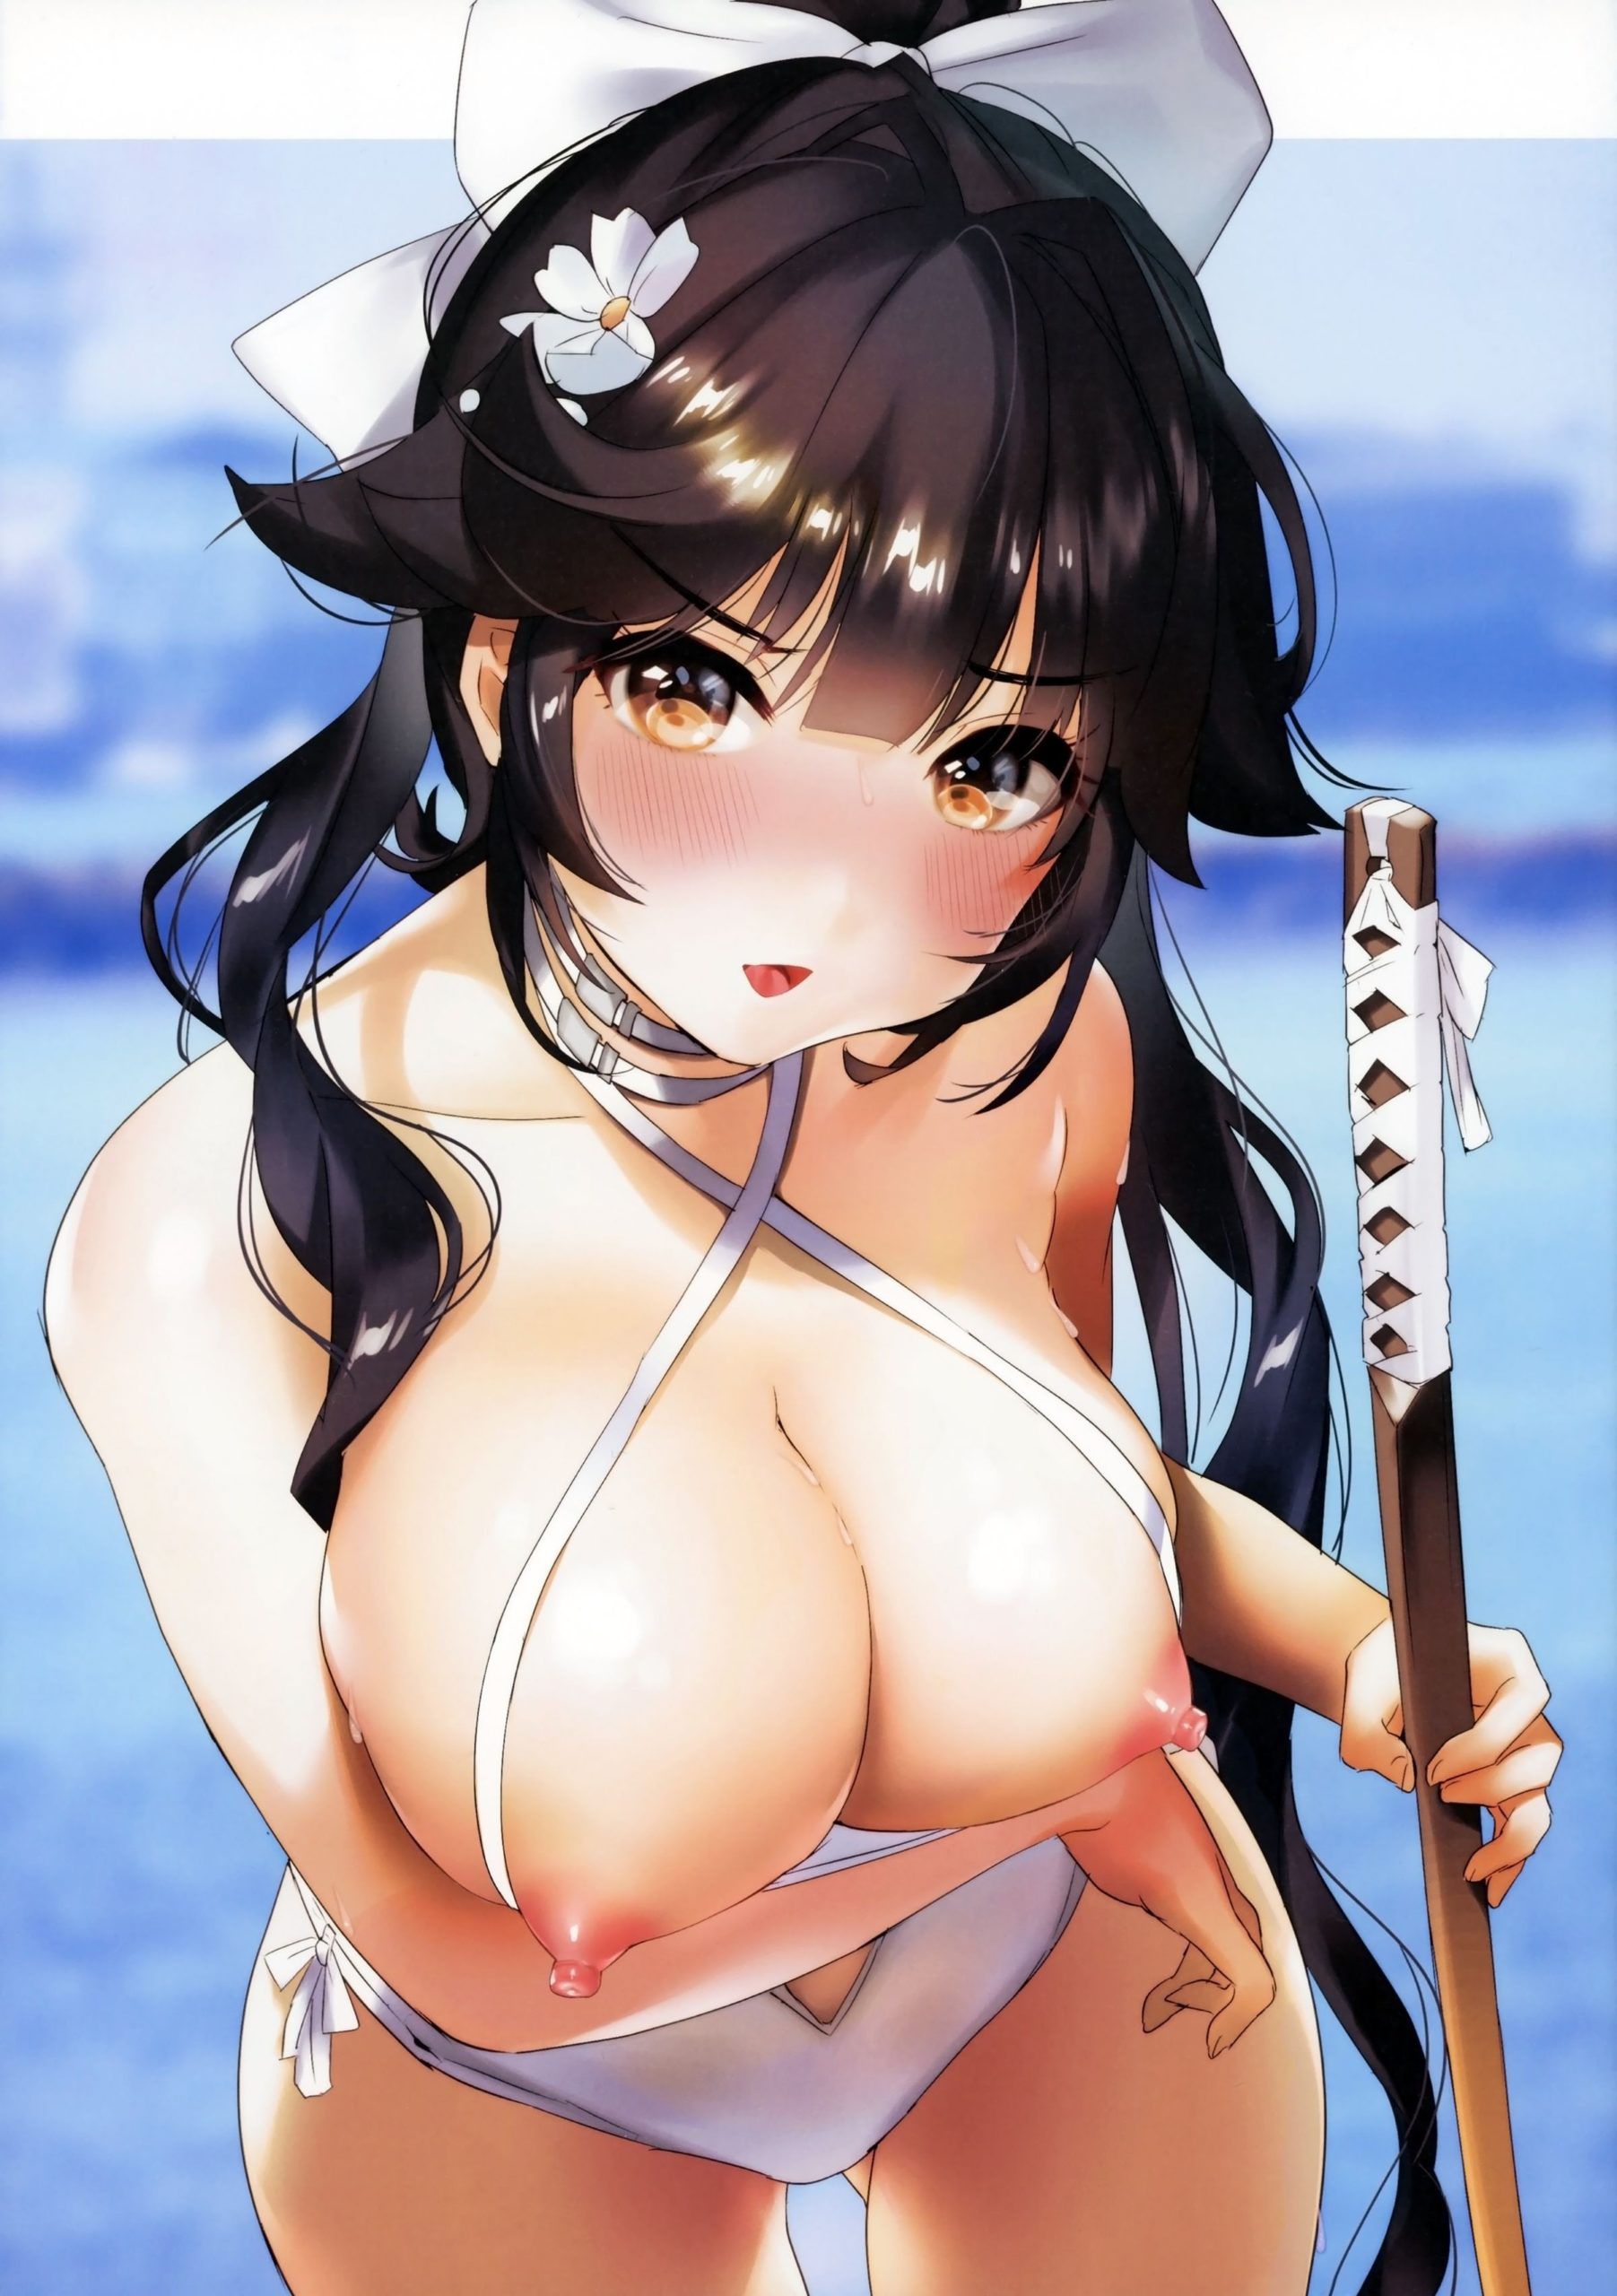 Isn't this the kind of Yamato girl we're looking for? Two-dimensional erotic image of a deep girl who is redding by doing naughty things called 3